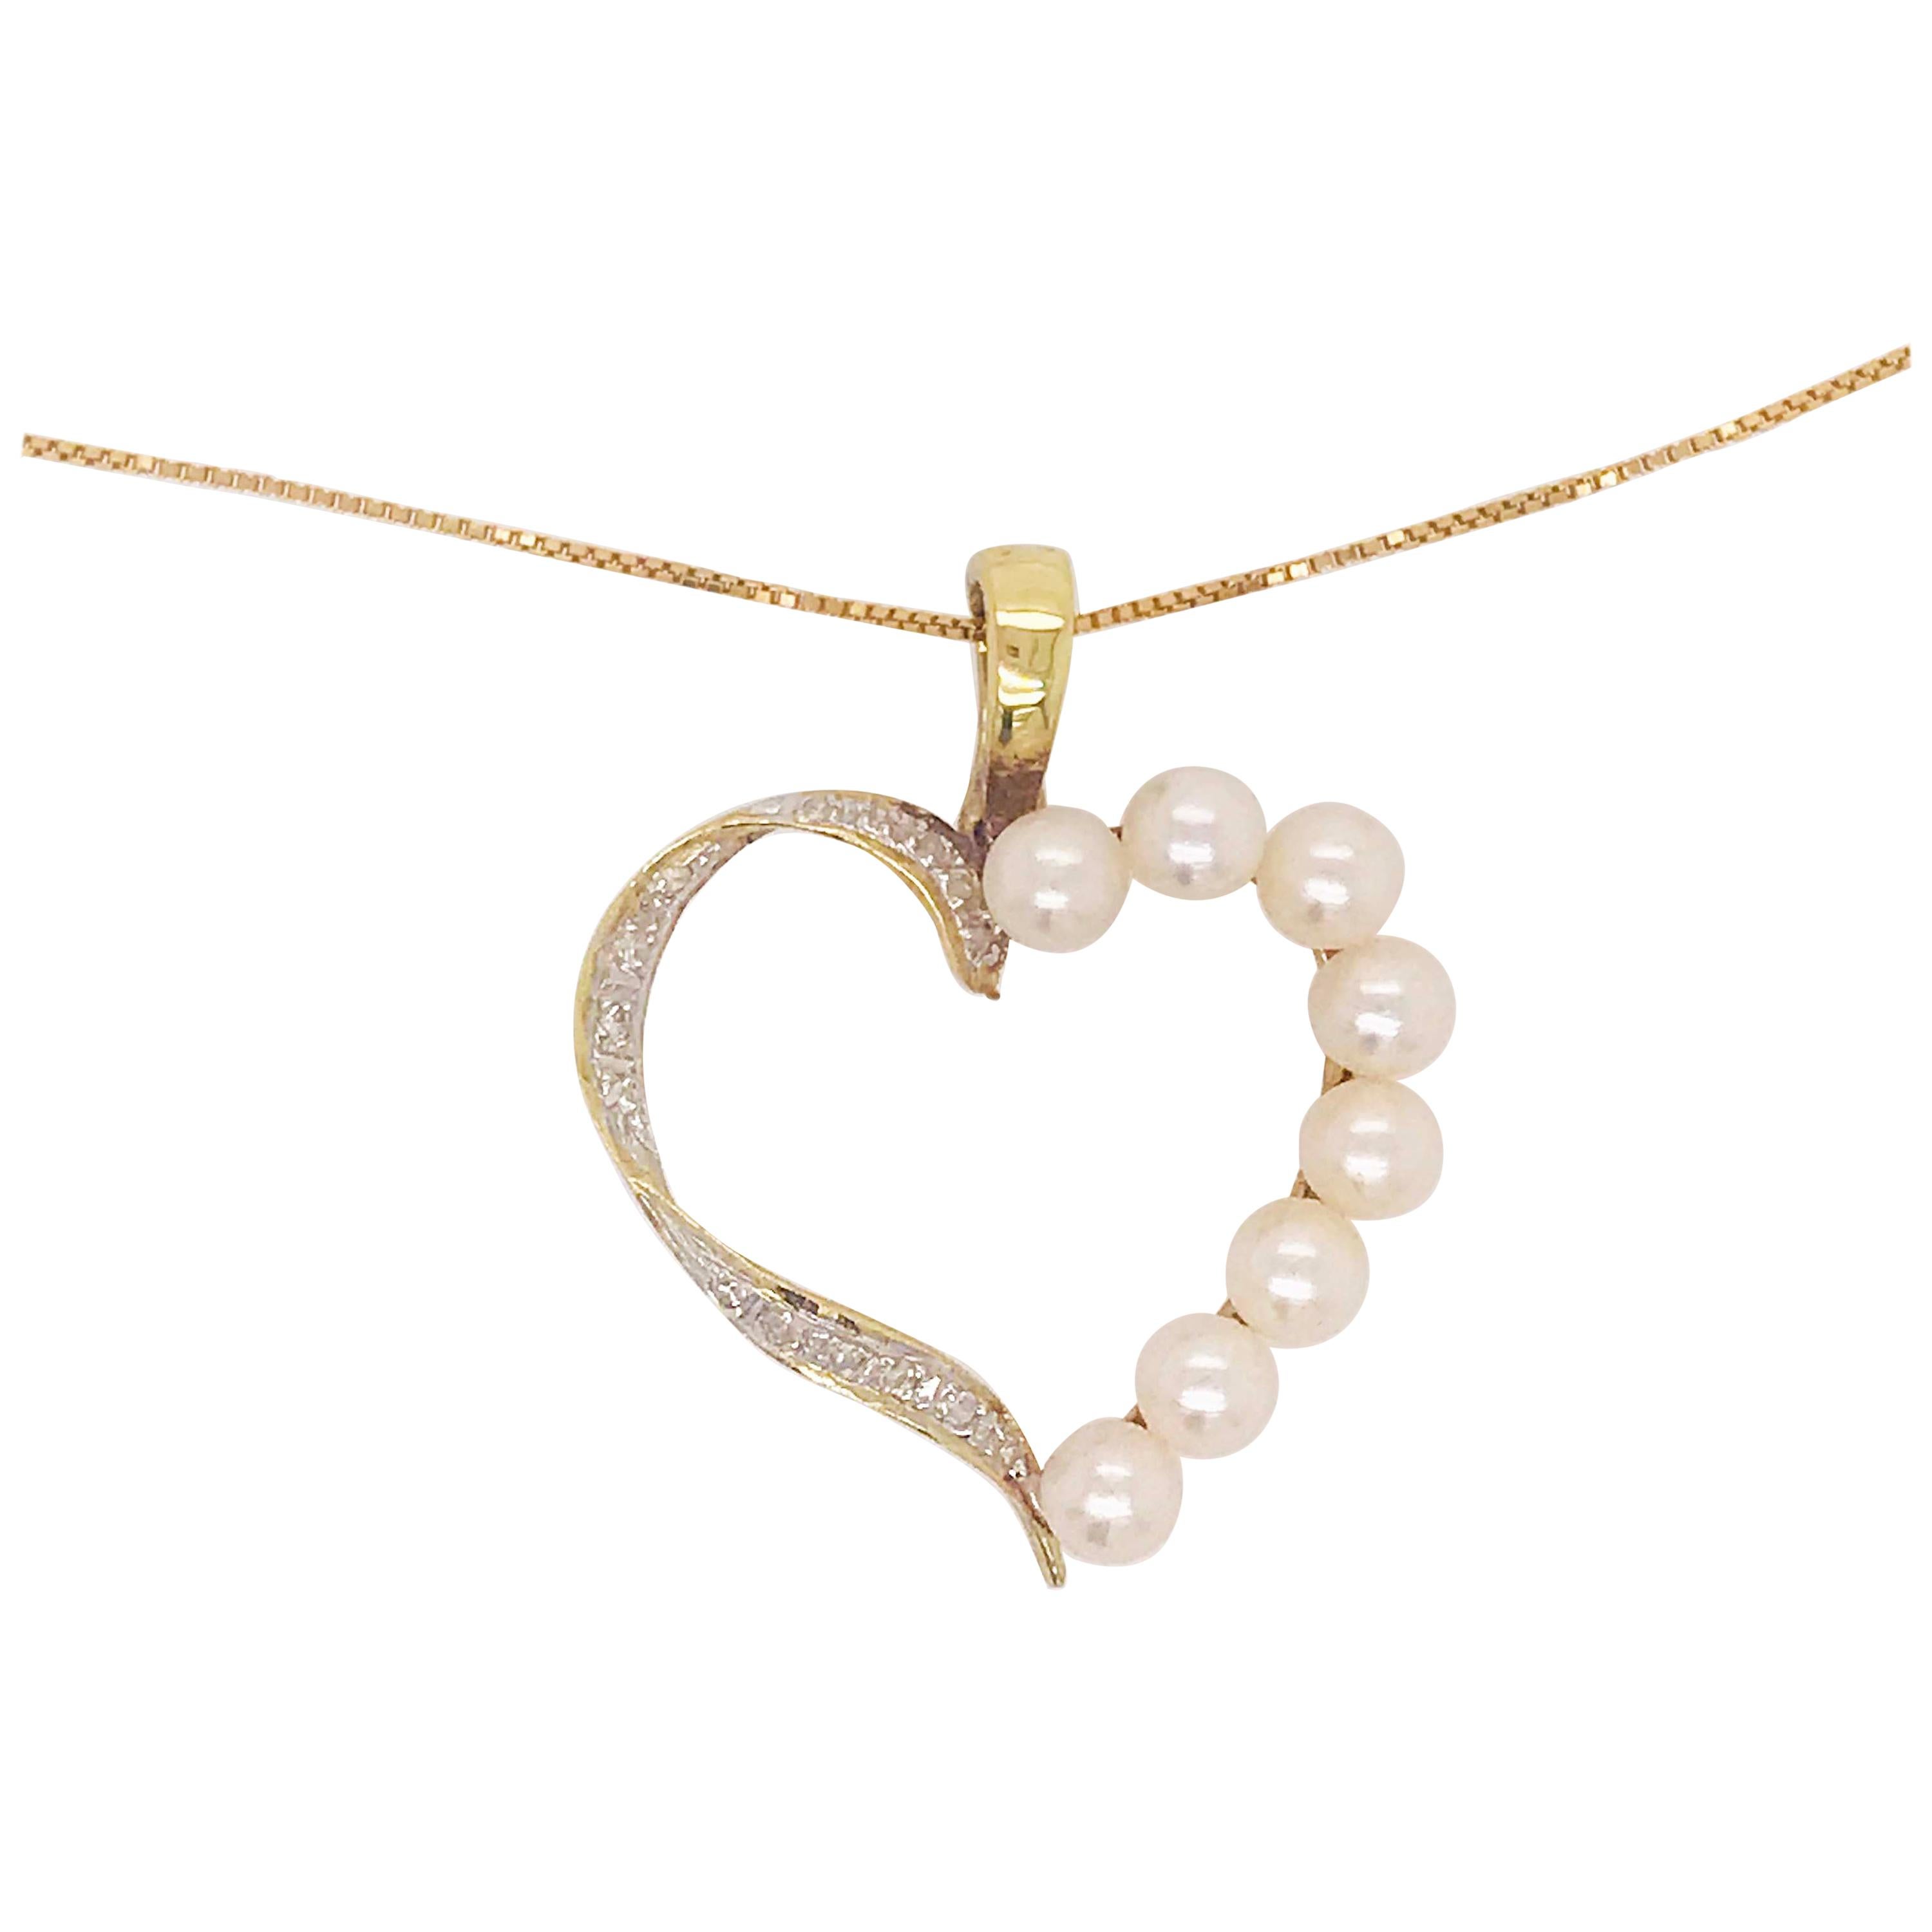 Diamond and Pearl Heart Pendant & Necklace Enhancer with 14 Karat Gold Box Chain For Sale